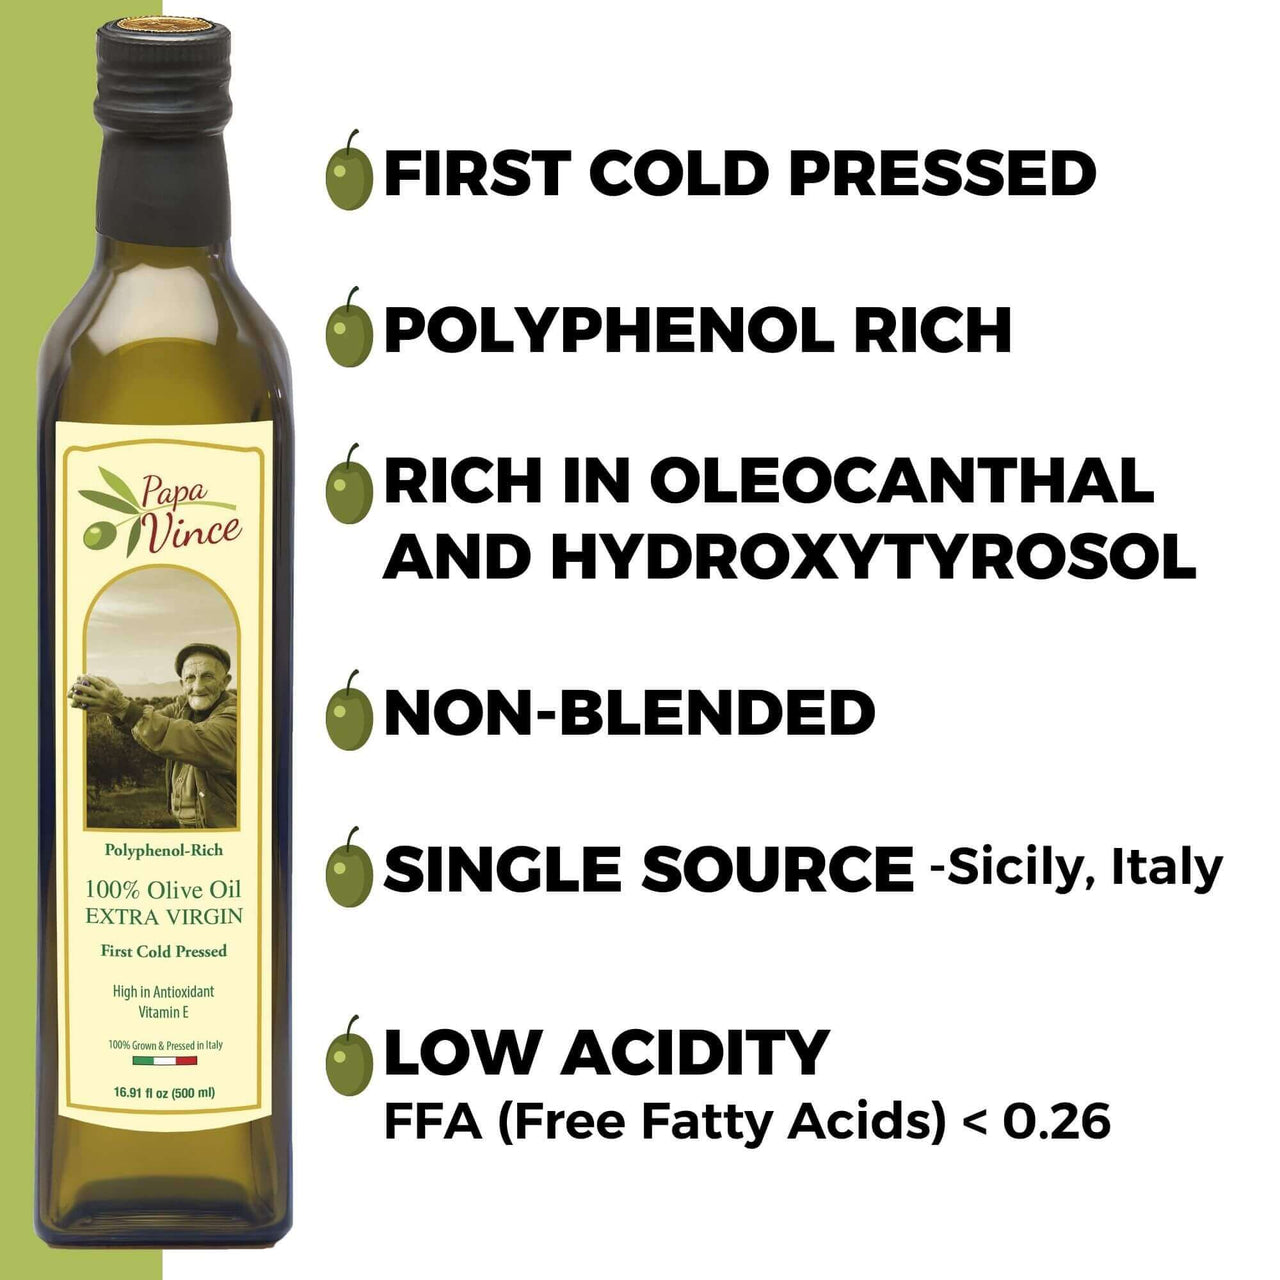 Papa Vince Olive Oil Extra Virgin - 4Bottles Save $23.00 with Subscription - Papa Vince